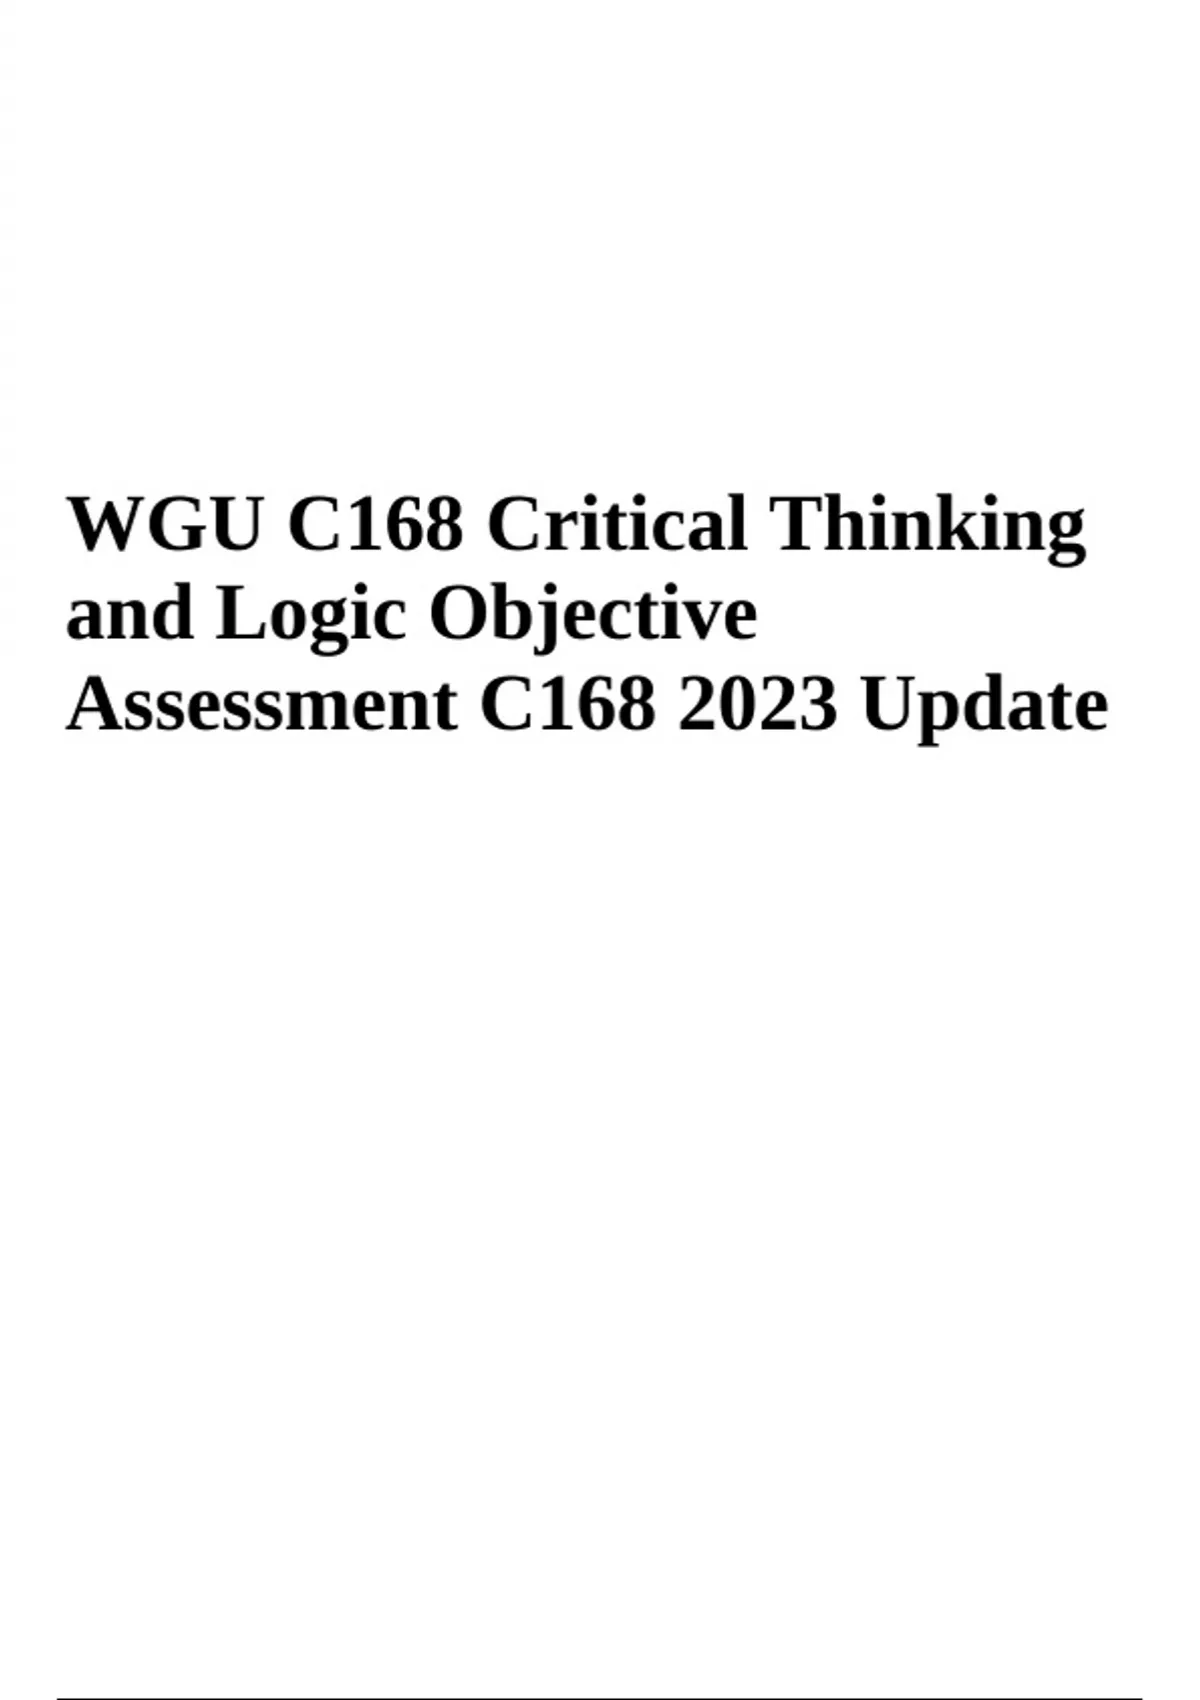 wgu critical thinking and logic objective assessment